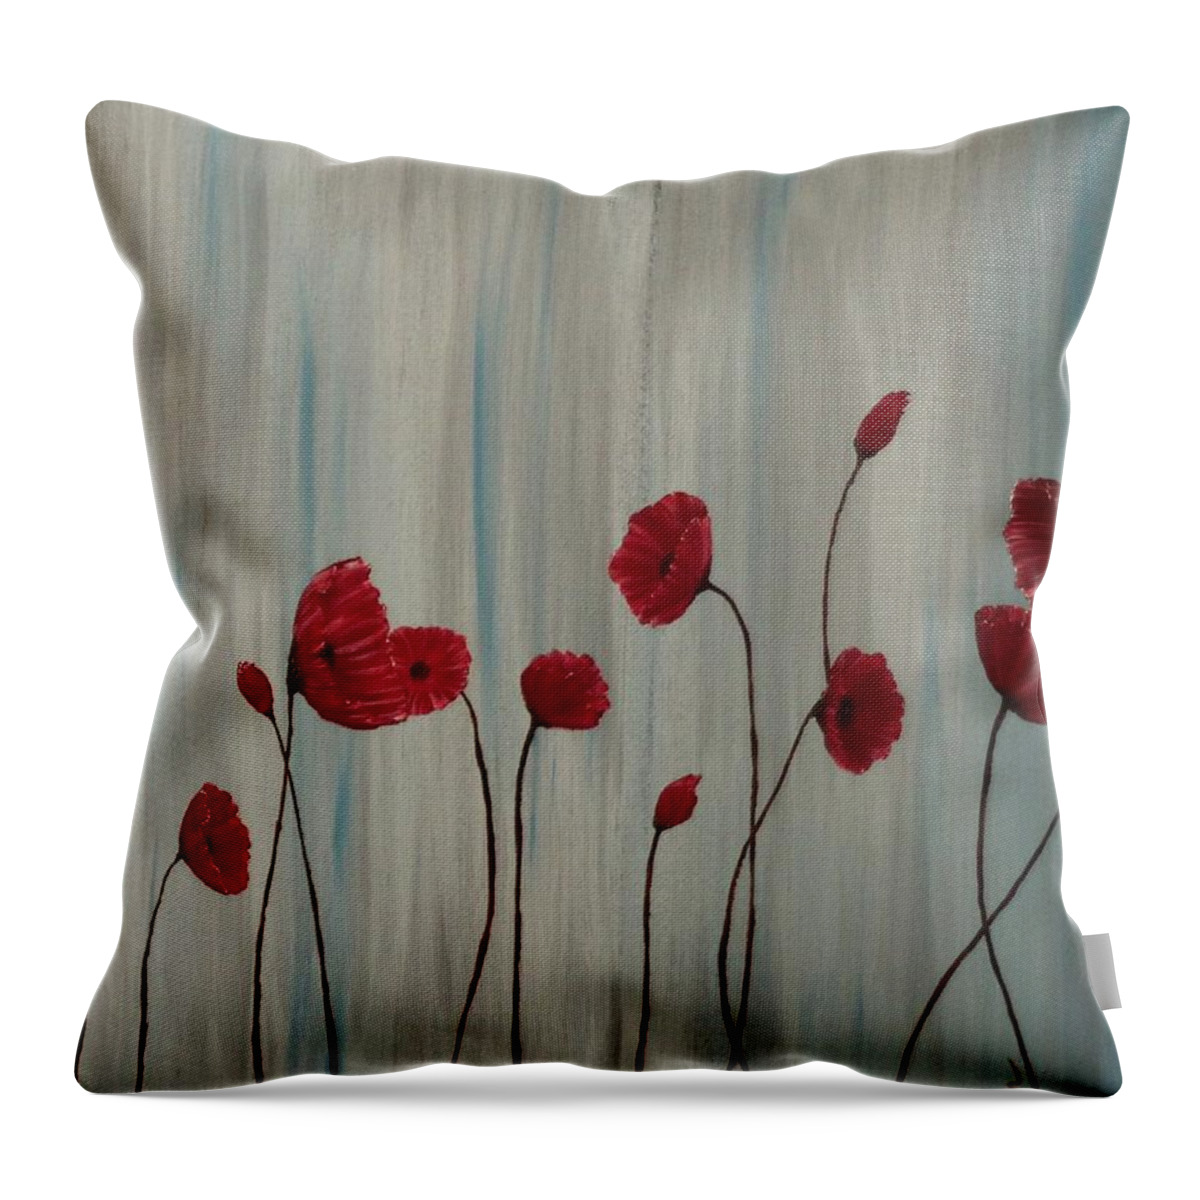 Poppy's Throw Pillow featuring the painting Poppy Dreams by Berlynn